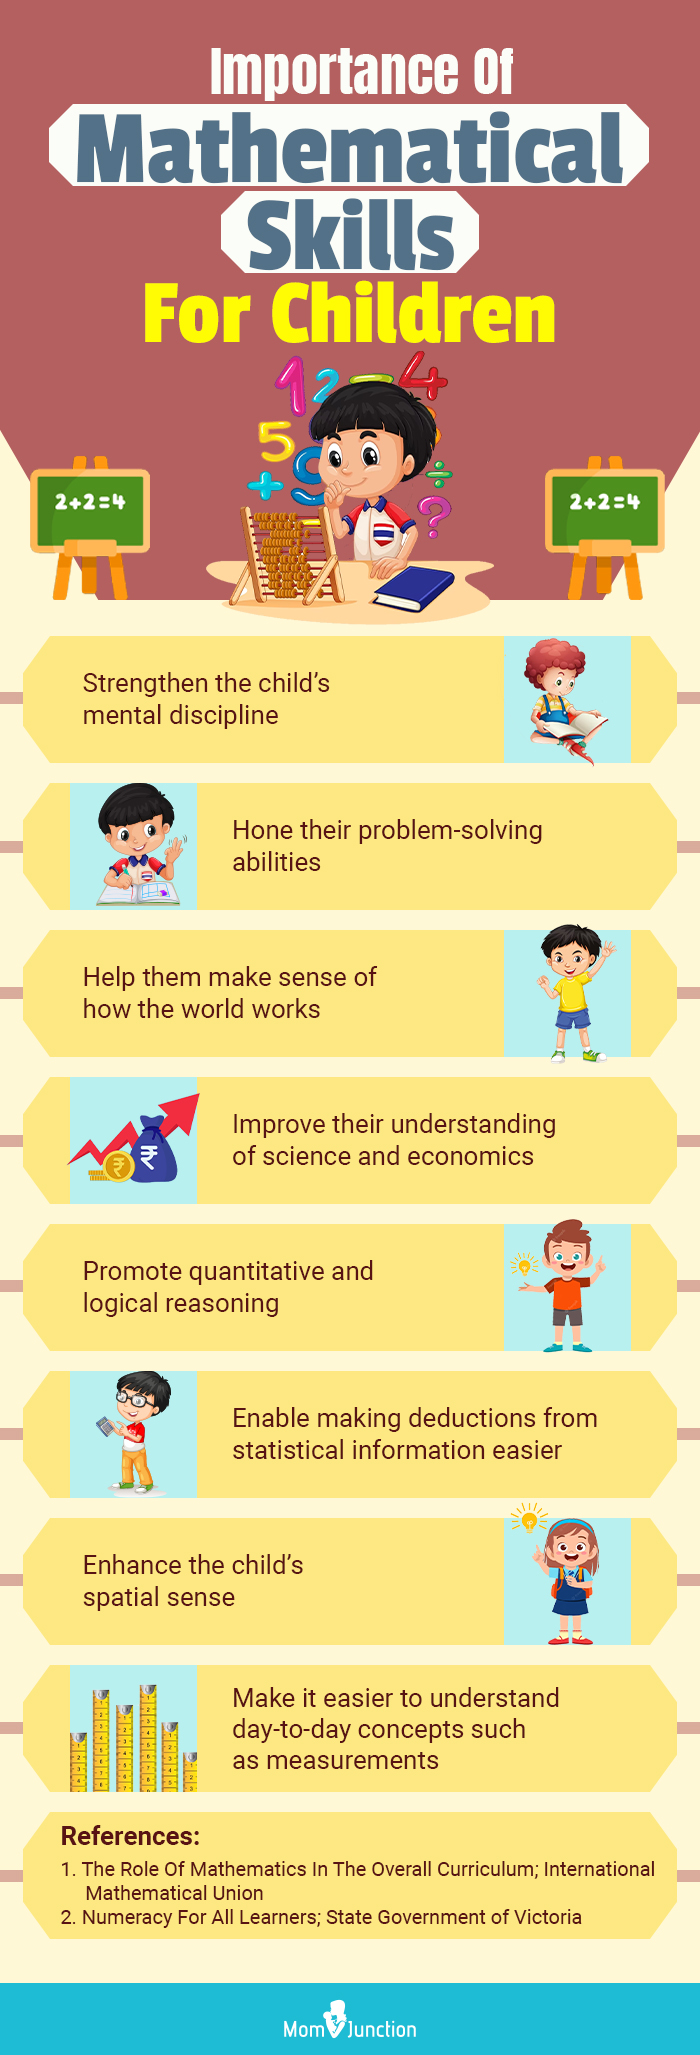 Importance Of Mathematical Skills For Children (infographic)